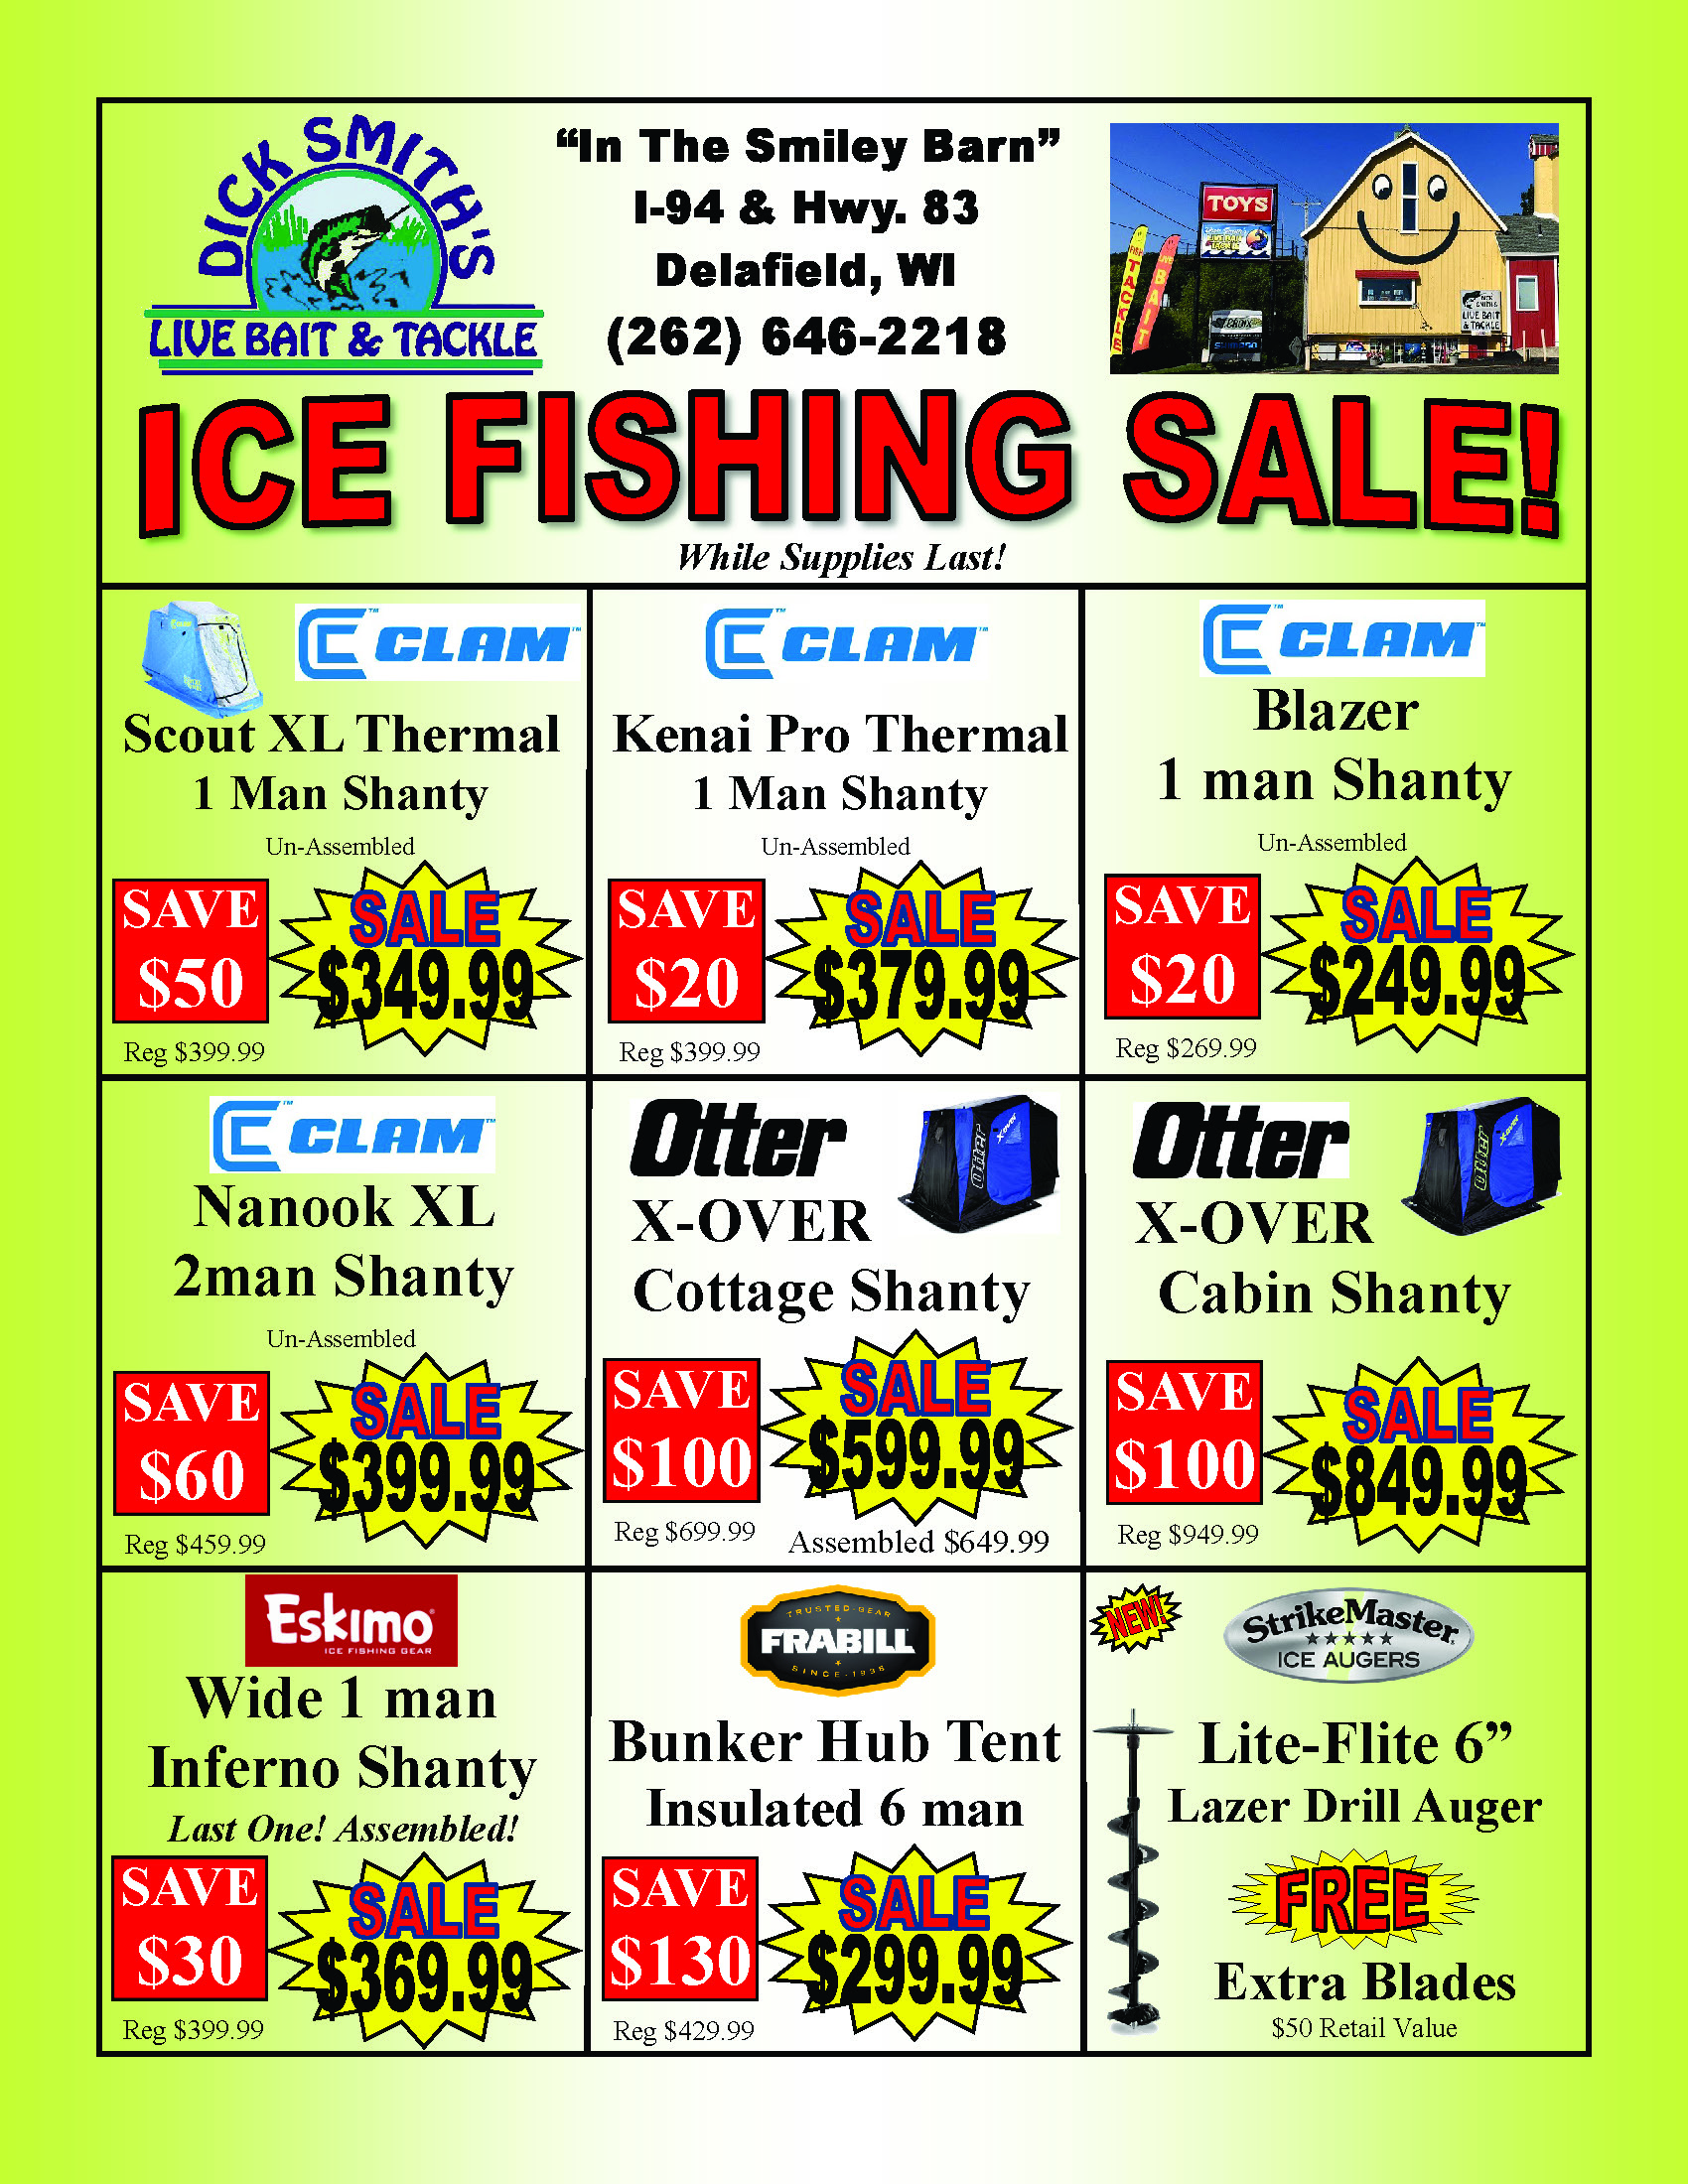 Ice Fishing February 2020_Page_1 - Dick Smith's Live Bait & Tackle